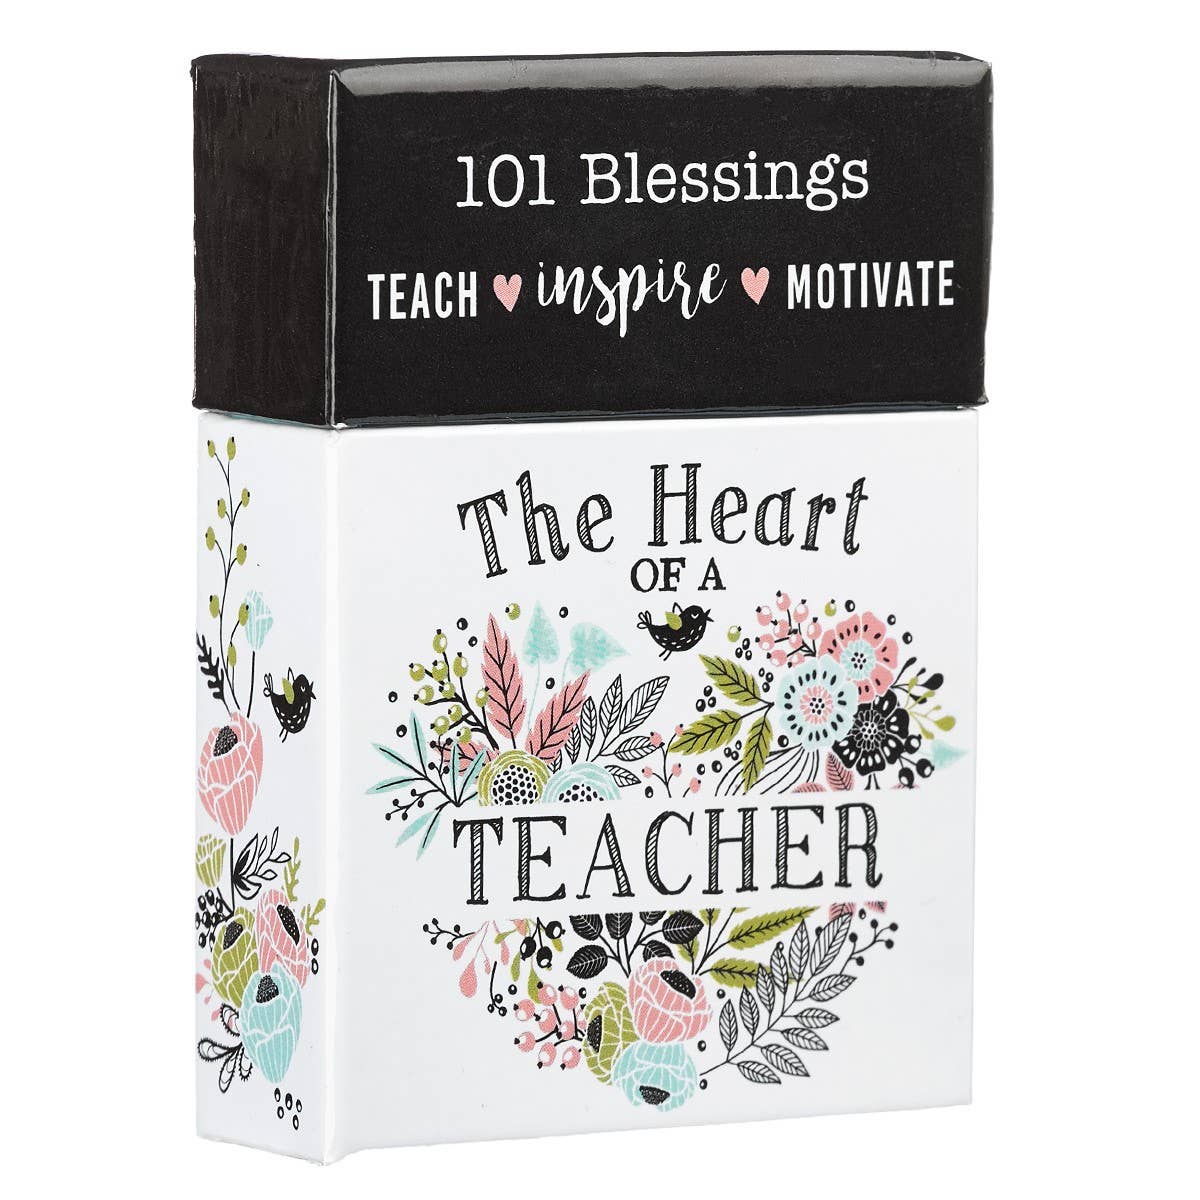 The Heart of a Teacher Box of Blessings